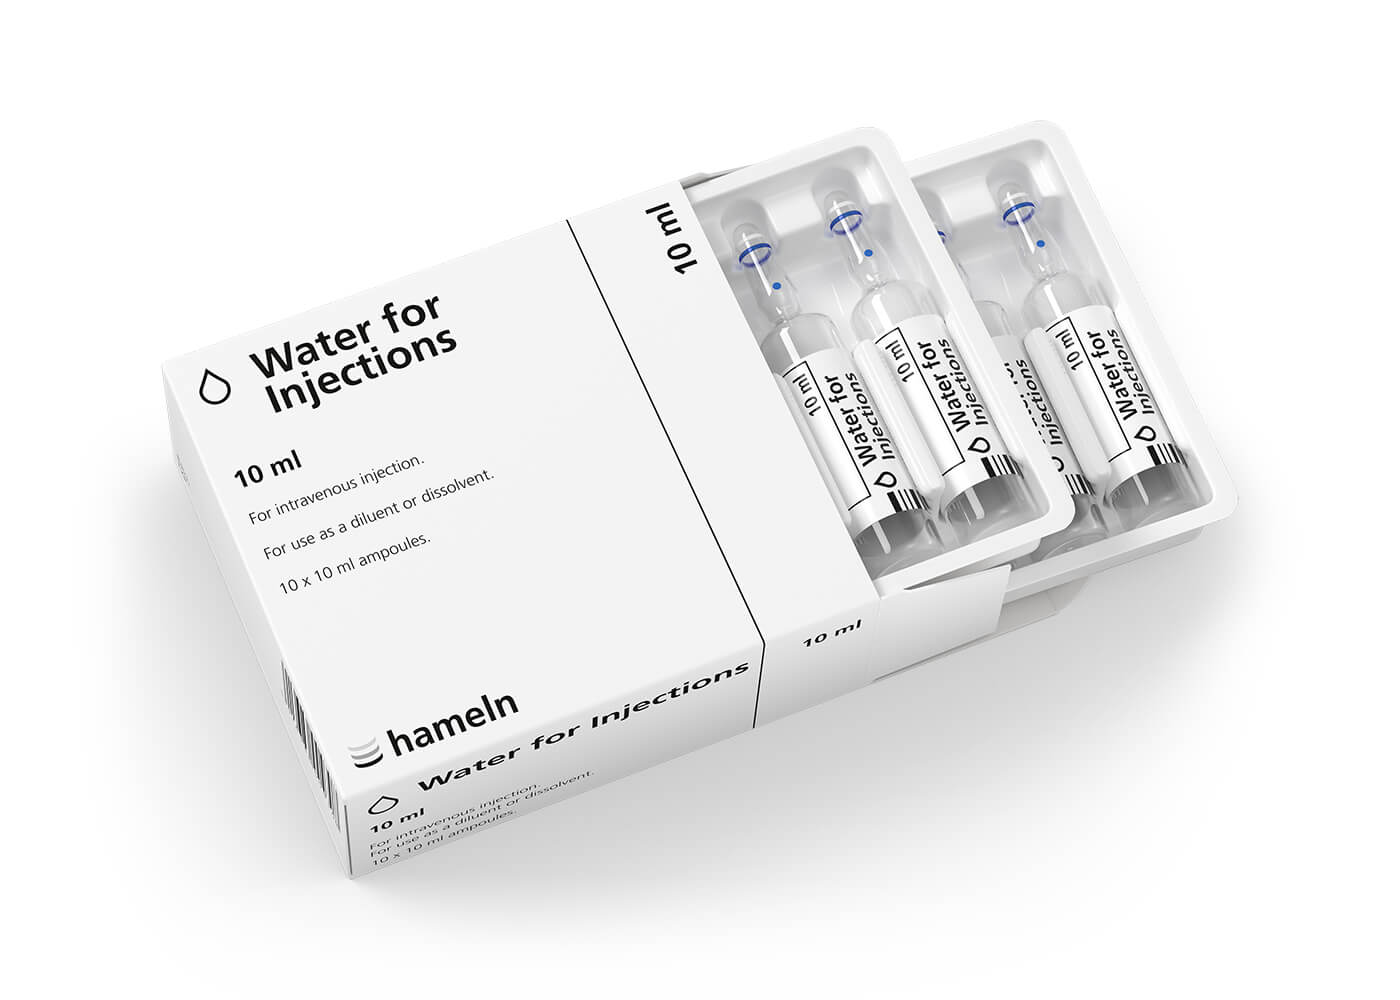 Picture of Water for injections 10ml x 10 (10ml x 10amps)